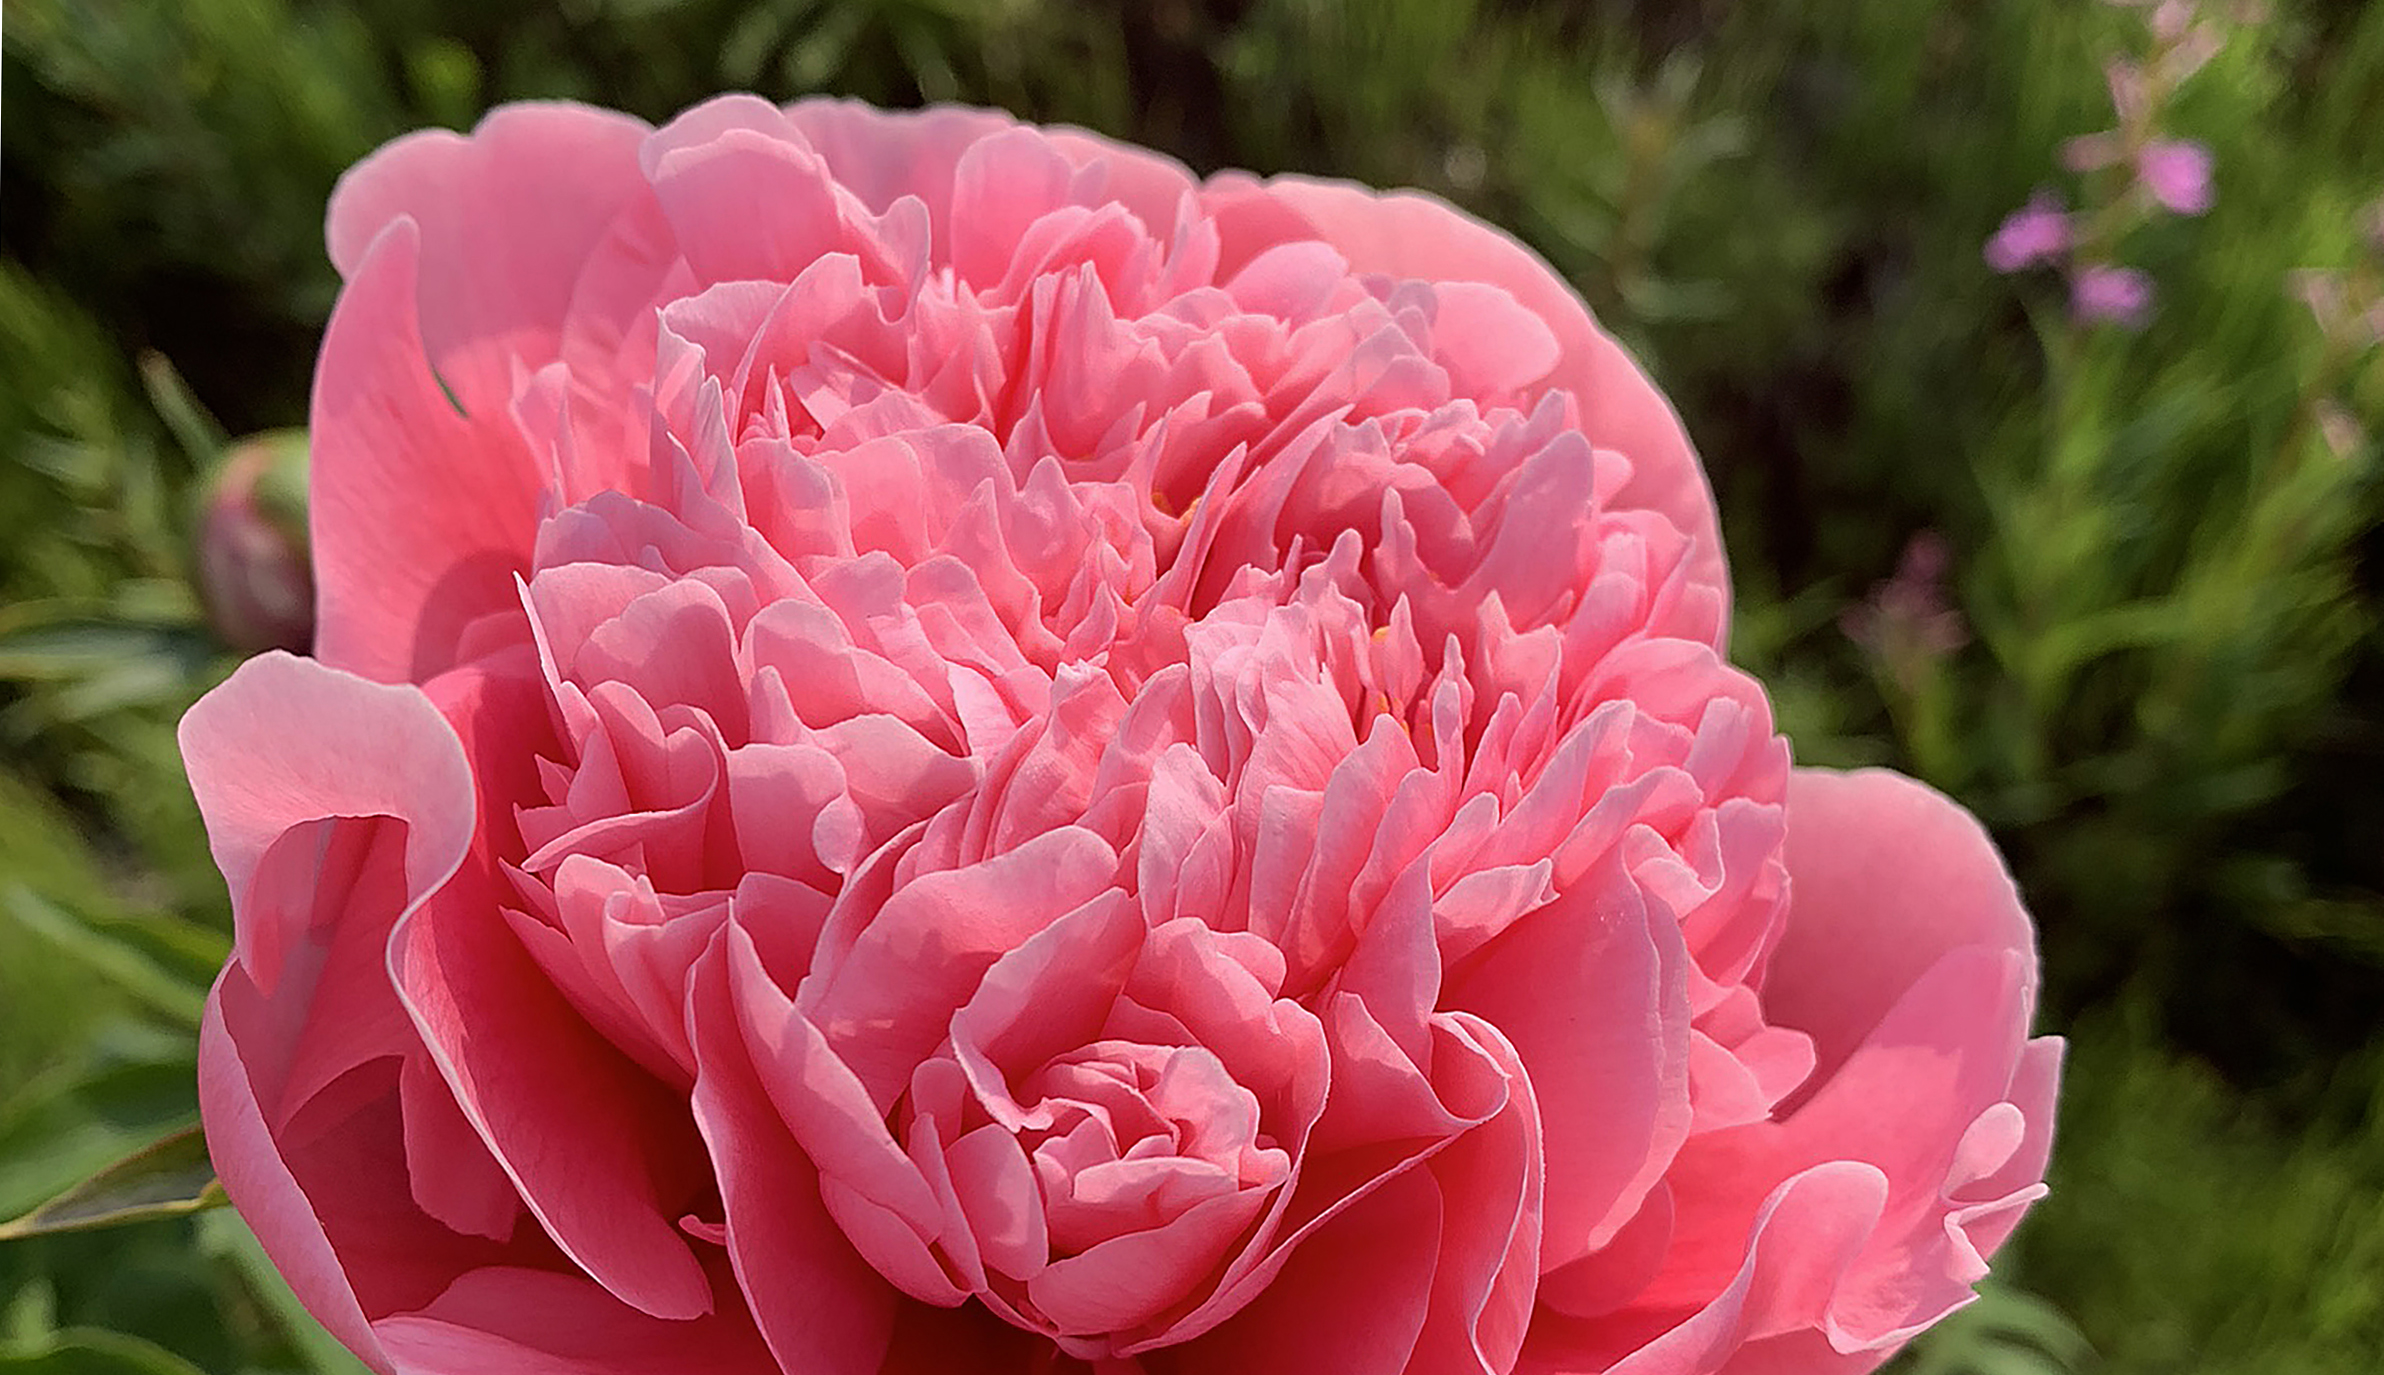 Close up shot of an Etched Salmon peony from Boreal Peonies.